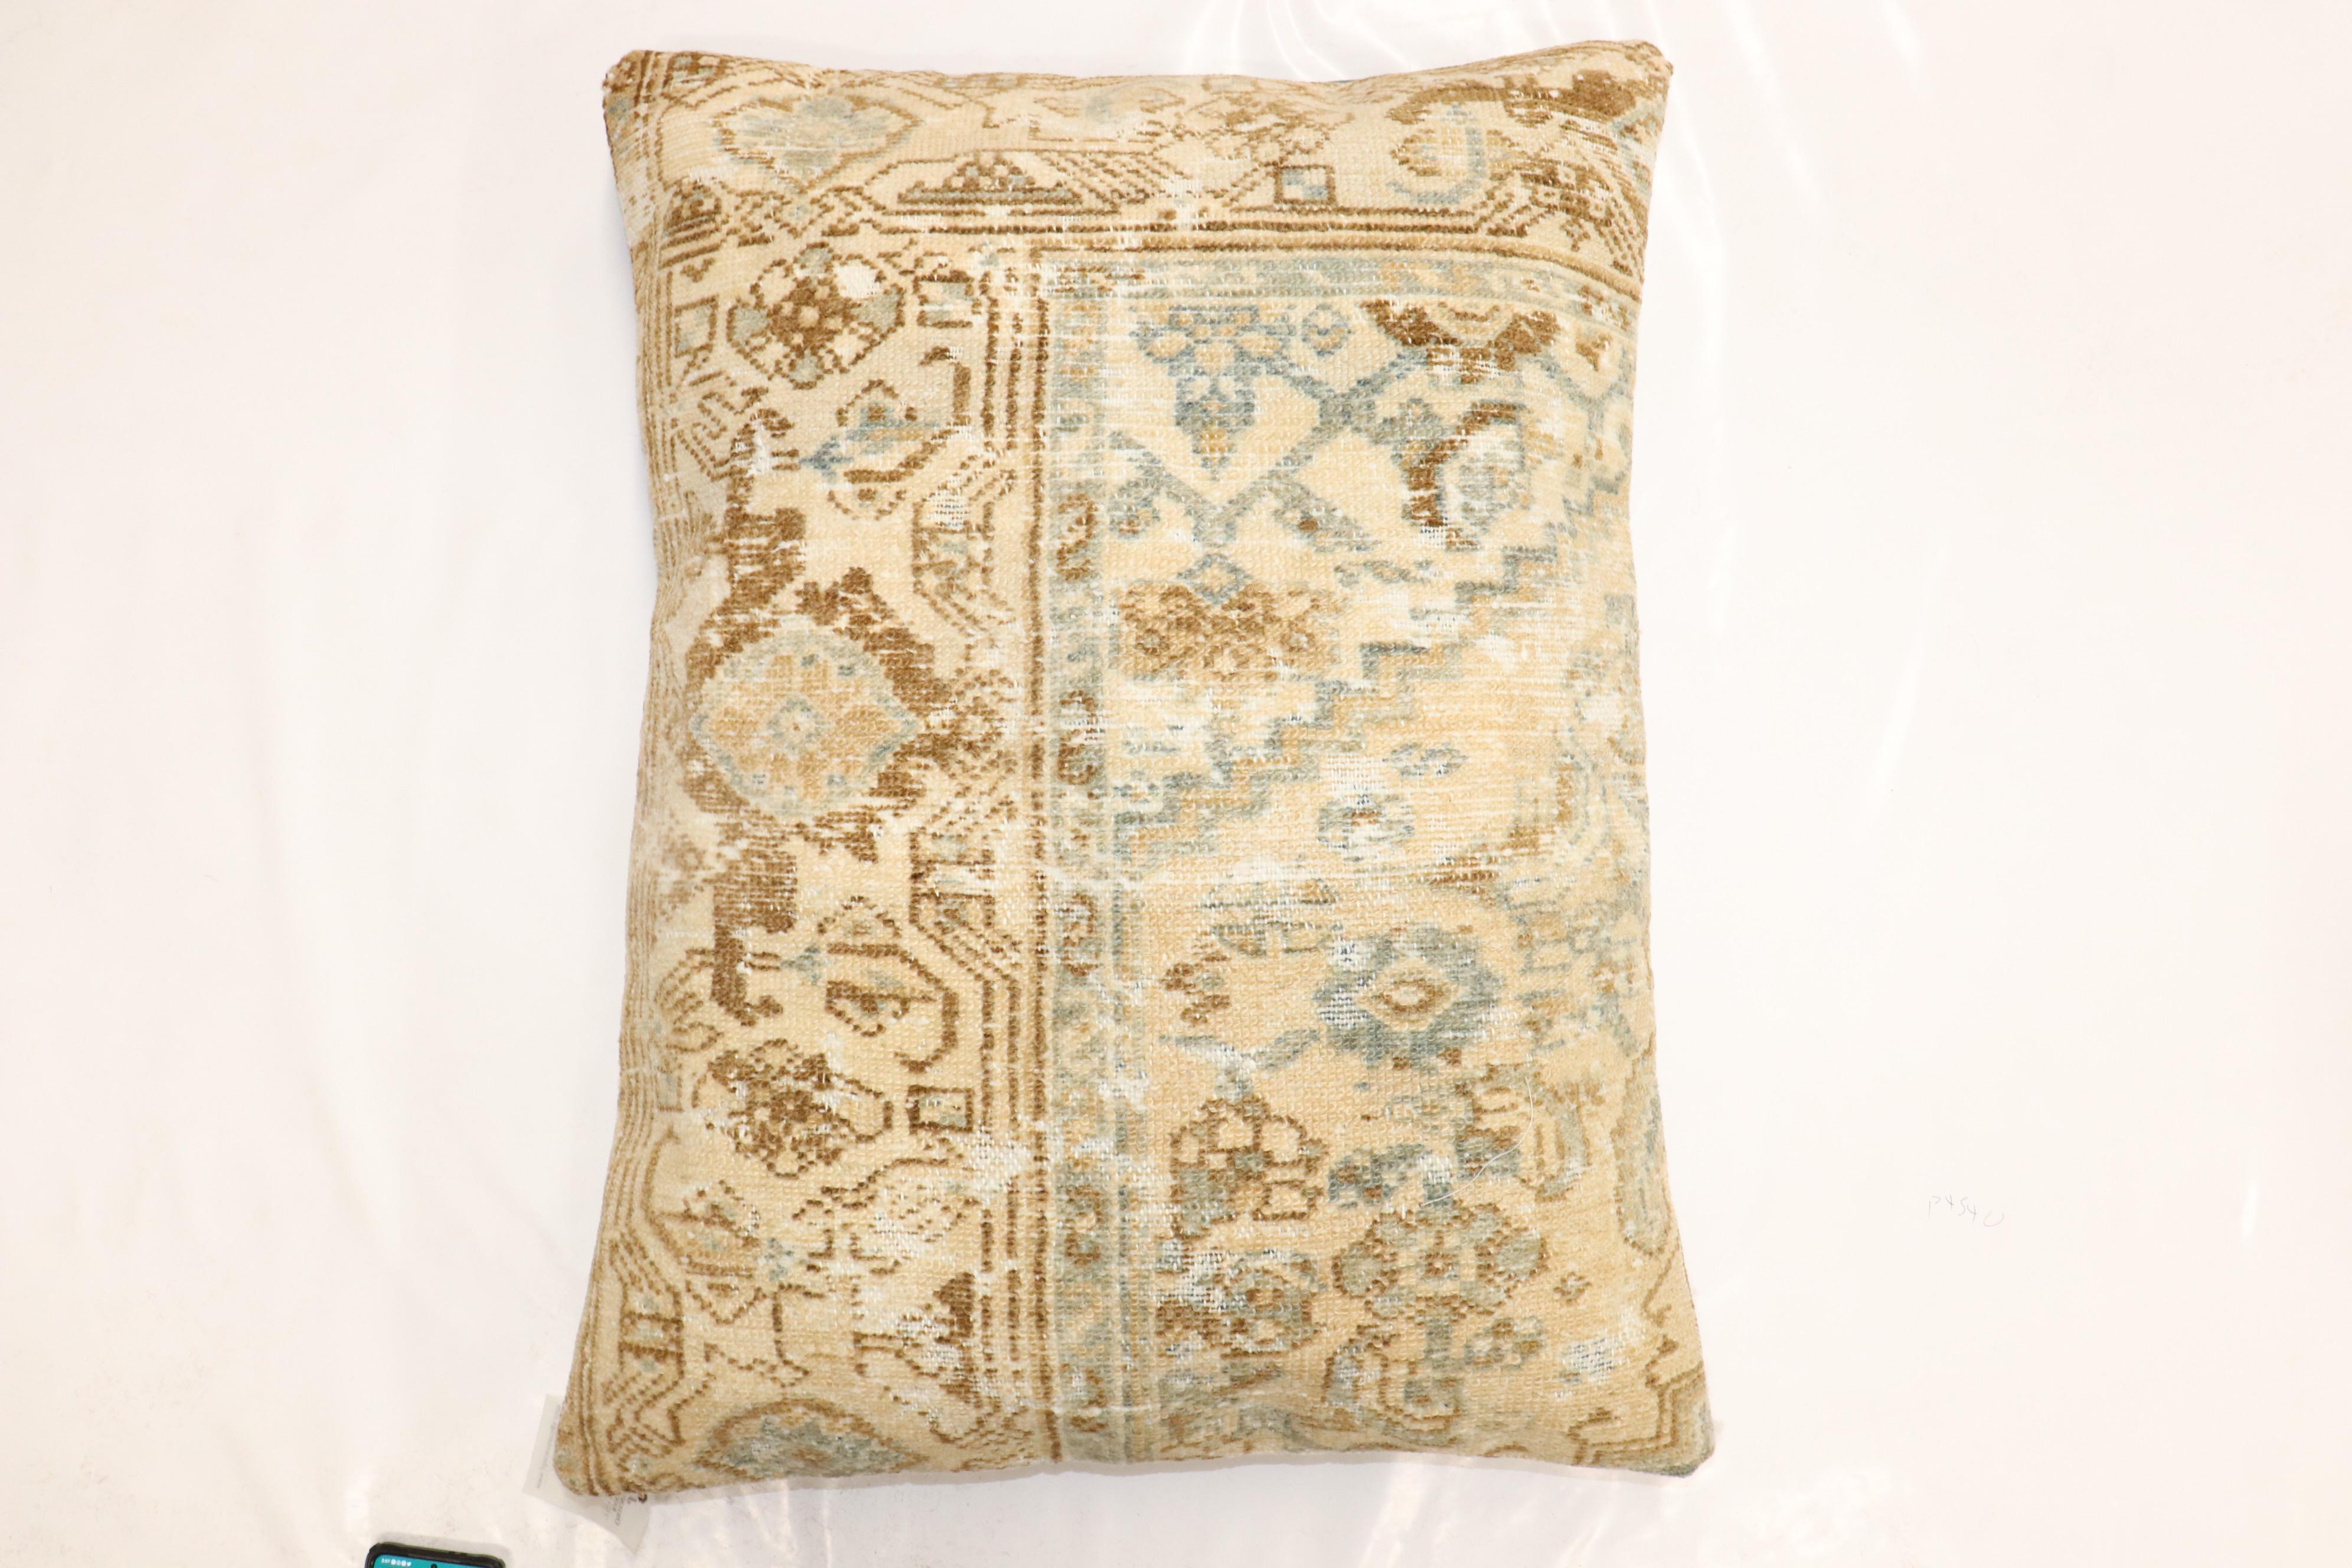 LargePillow made from an antique Persian Malayer rug in browns and green.

Measures: 24'' x 21''.